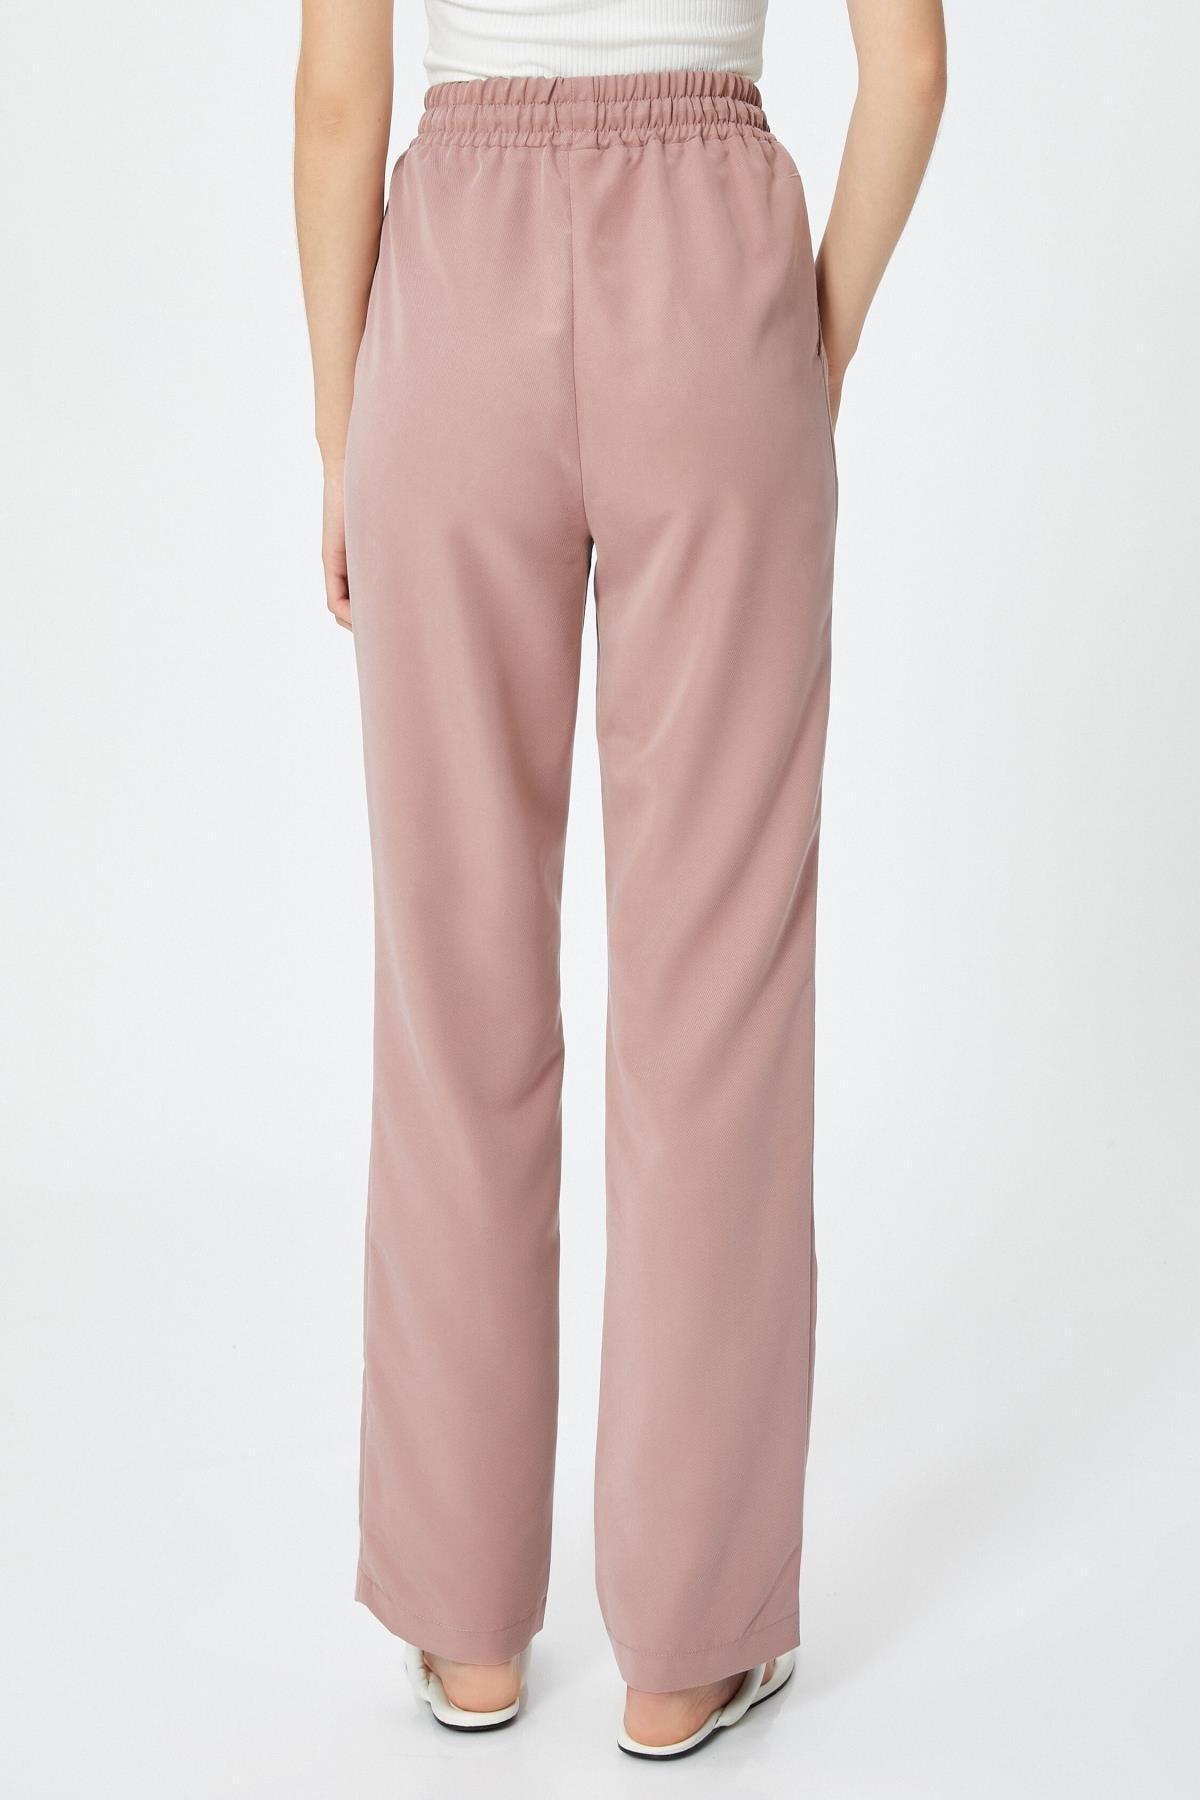 Koton - Pink Tied Waist Trousers